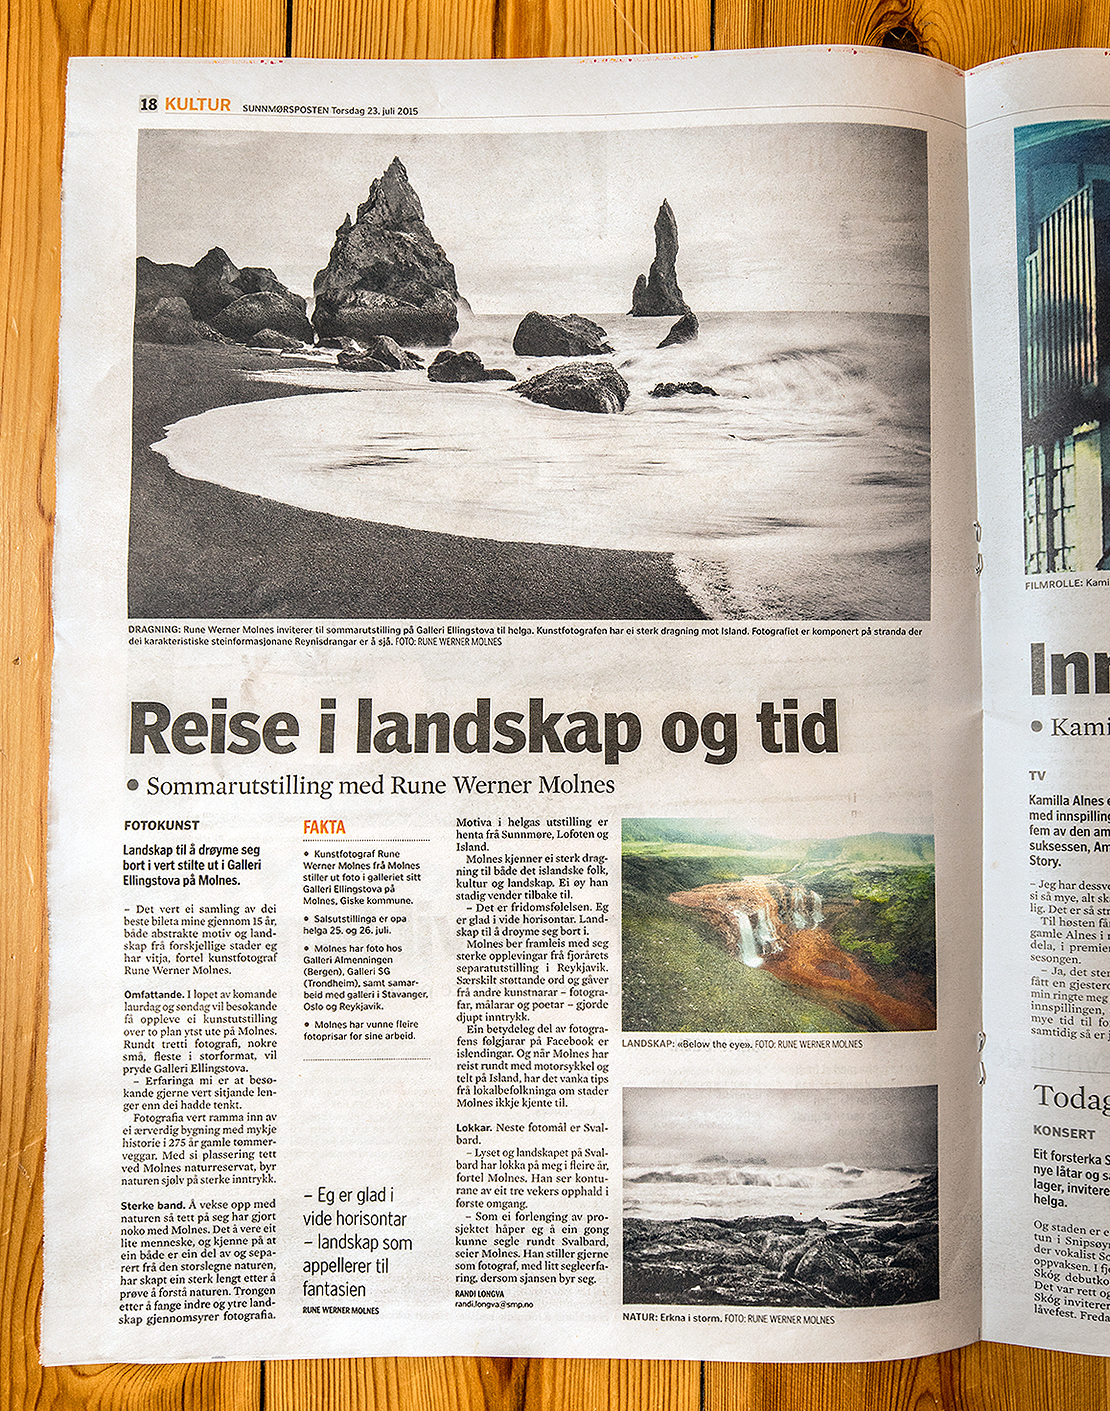 Article about the summer exhibition in Sunnmørsposten, the regional newspaper.